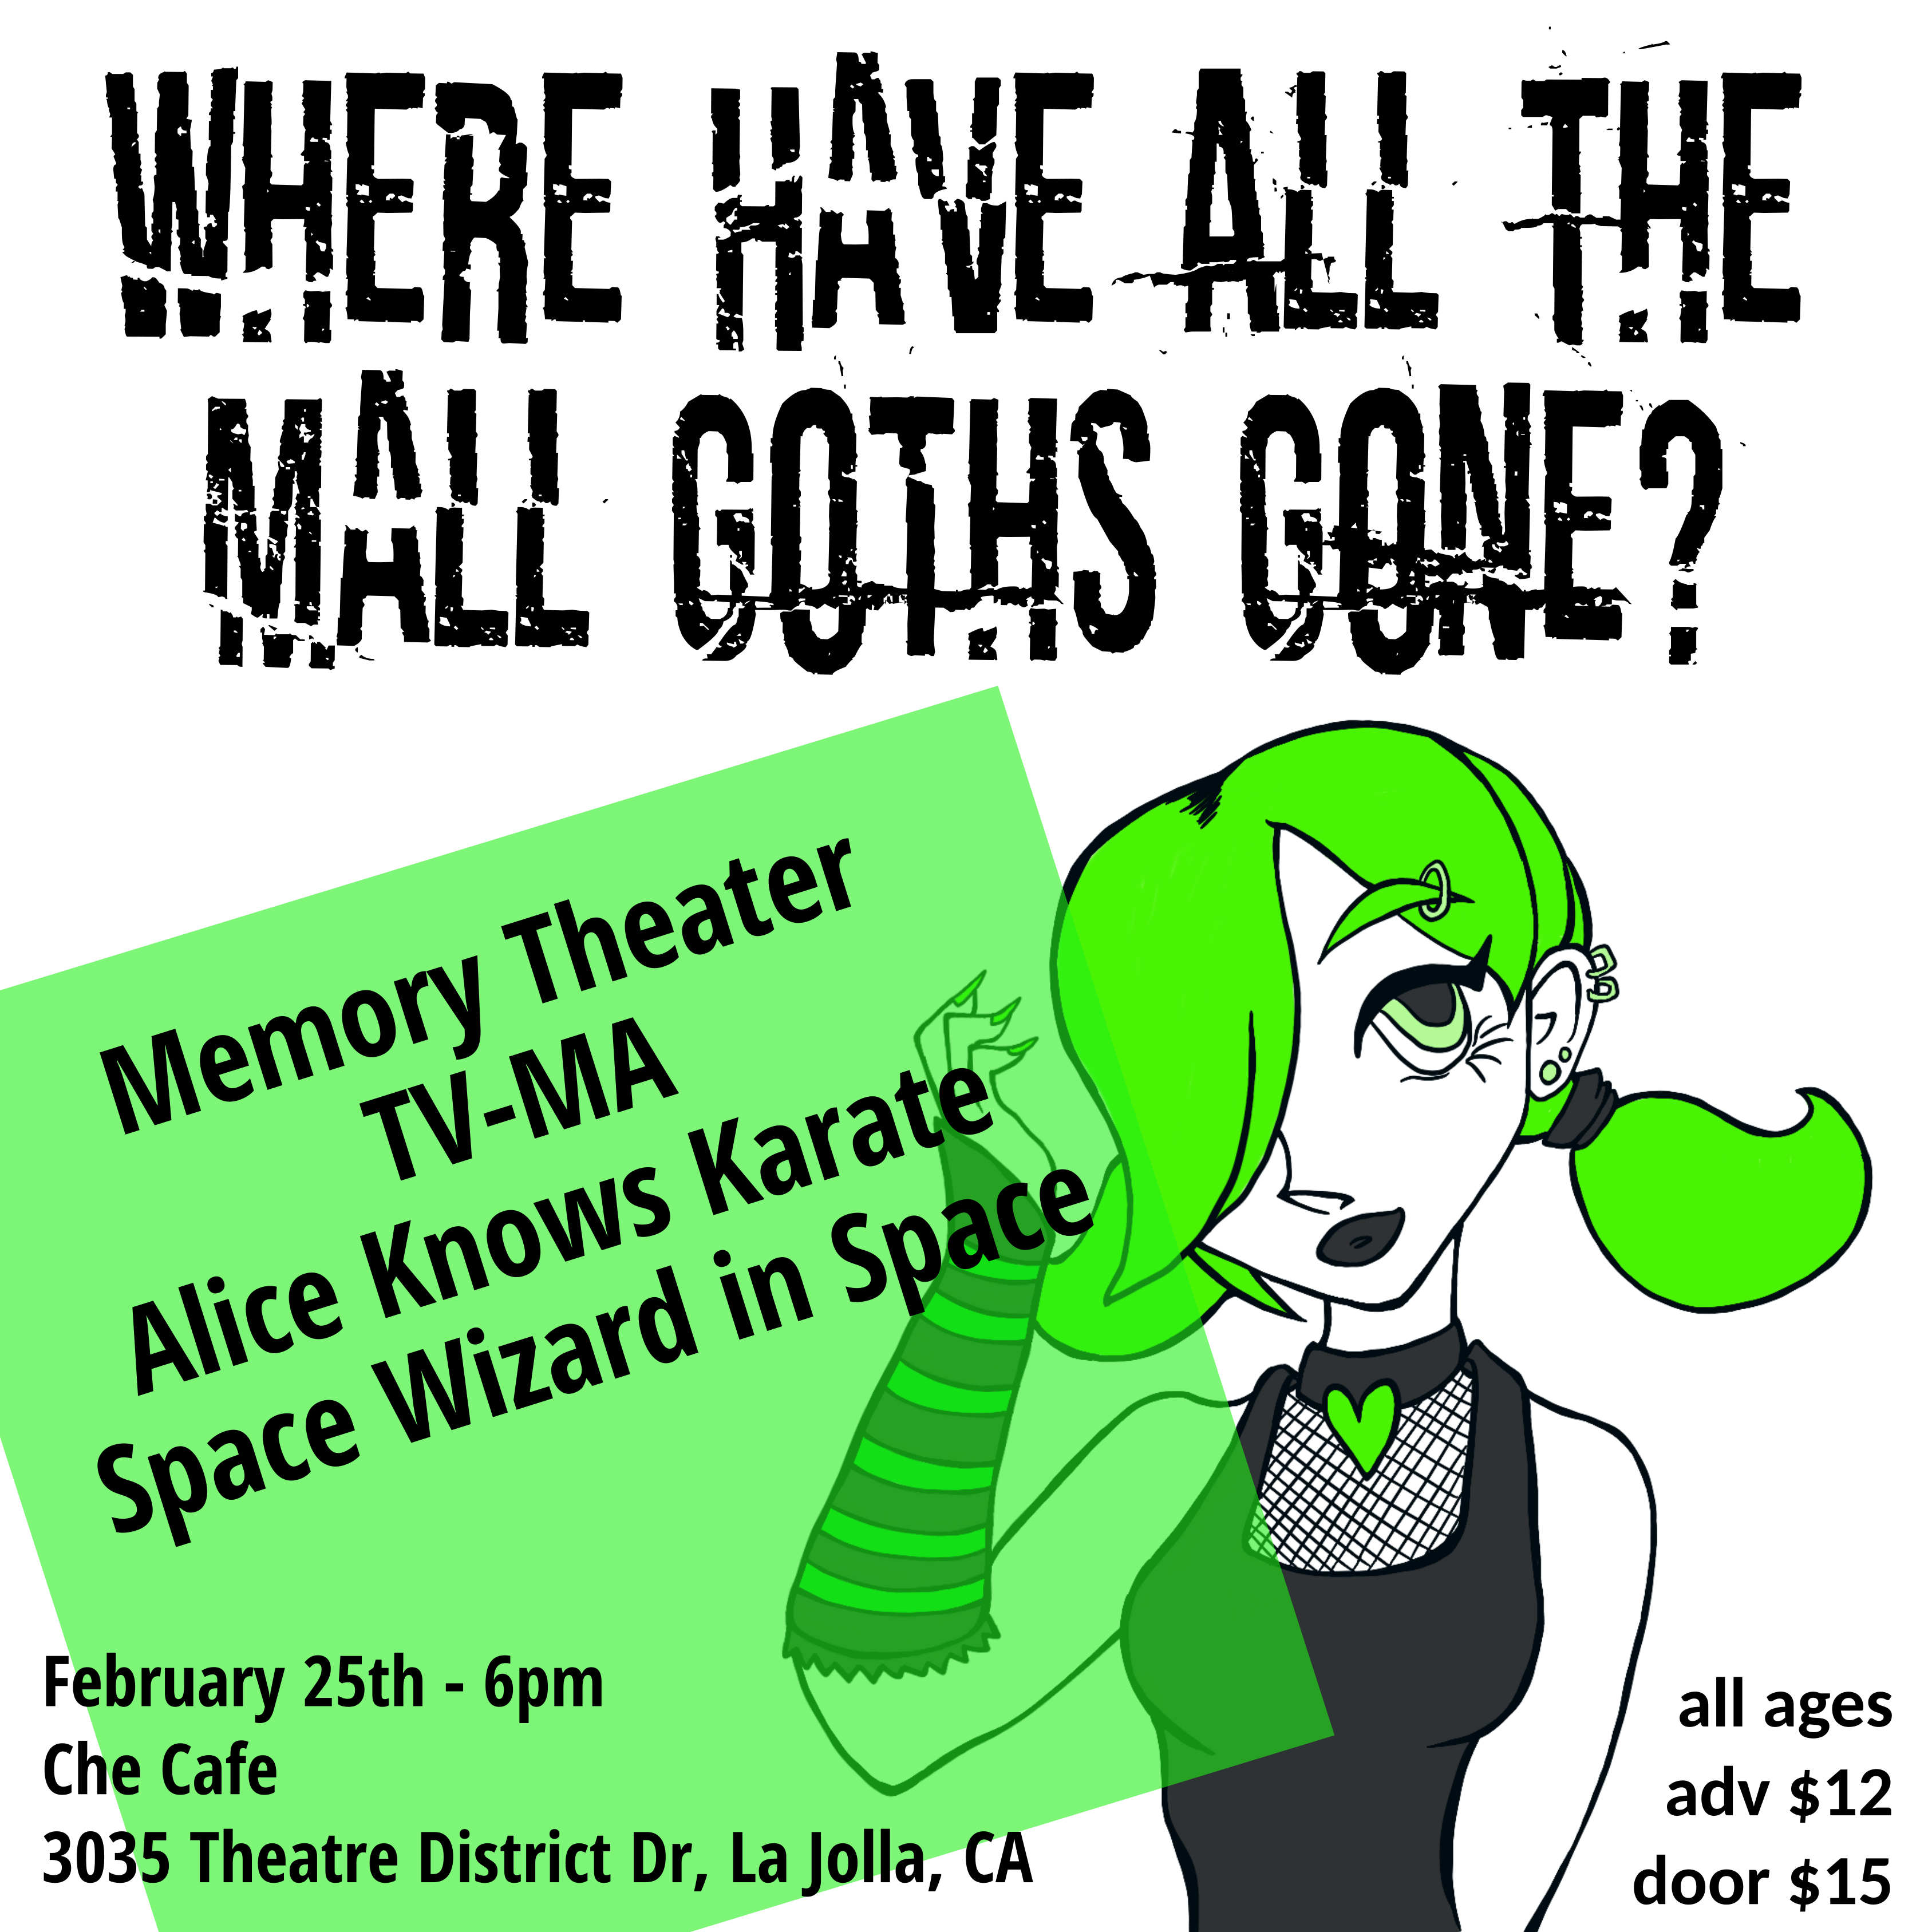 Flyer for San Diego Date of TV-MA, Alice Knows Karate, Memory Theater mini tour: Where Have All the Mall Goths Gone? There’s a drawing of a Y2K mall goth girl with piercings, striped glove stockings, fishnets, and a black shirt. The girl has green accents. Text reads: Where Have All the Mall Goths Gone?” Memory Theater, TV-MA, Alice Knows Karate, Space Wizard in Space. February 25th – 6pm. Che Café, 3035 Theater District Dr, La Jolla, Ca. All Ages, Adv $12, Door $15.